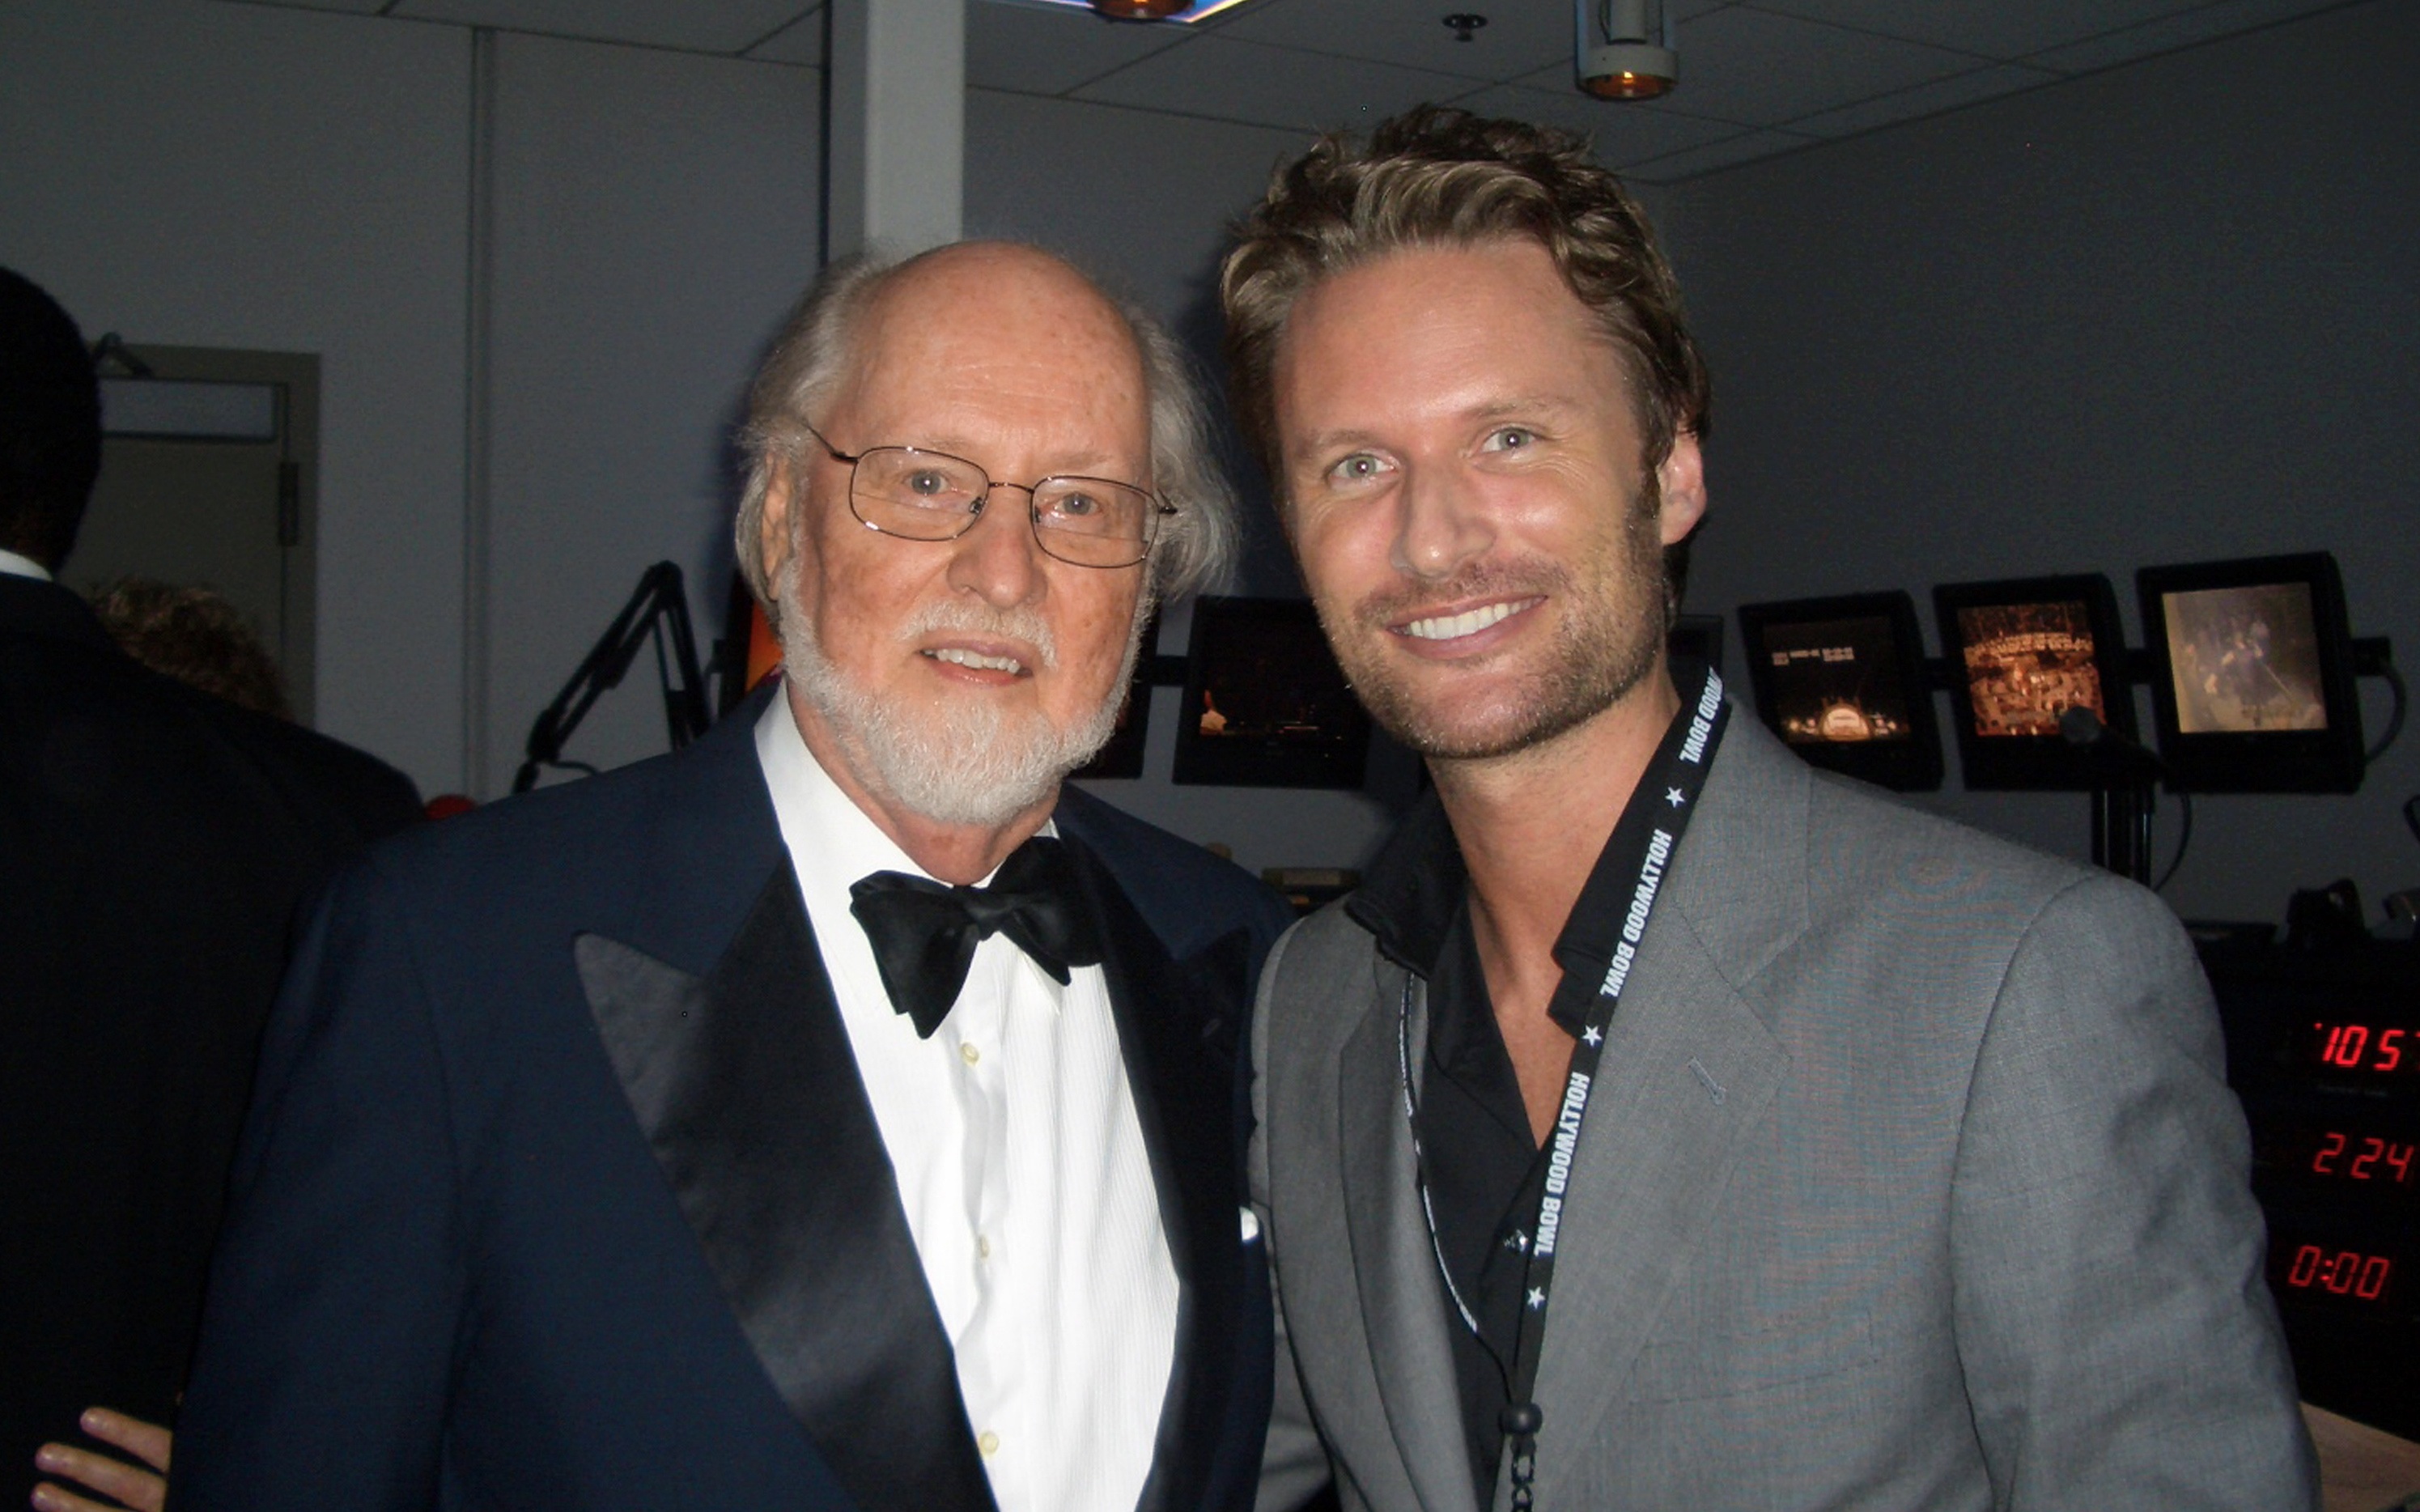 Composers John Williams and Brian Tyler backstage at the Hollywood Bowl